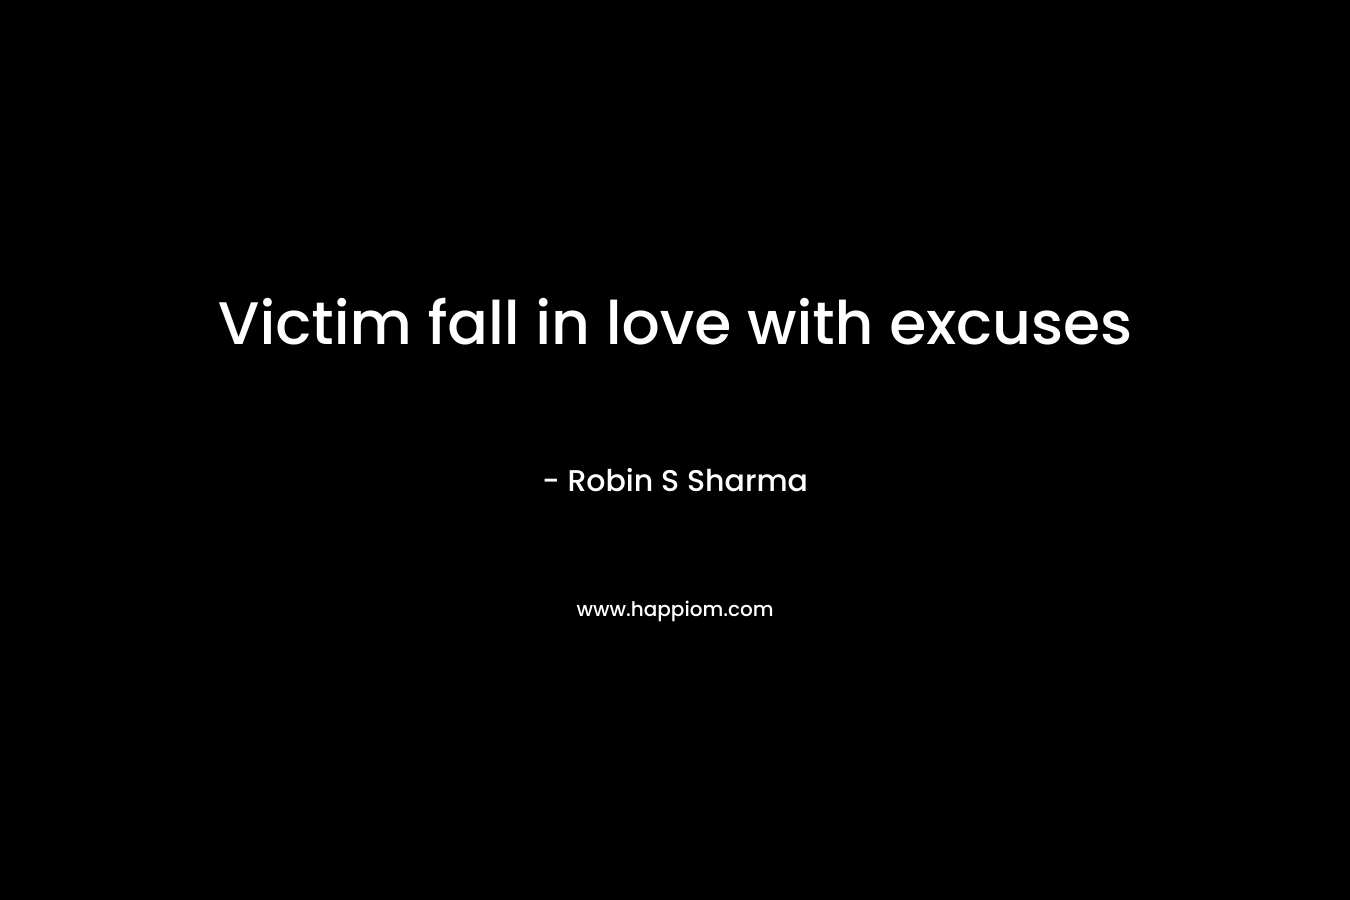 Victim fall in love with excuses